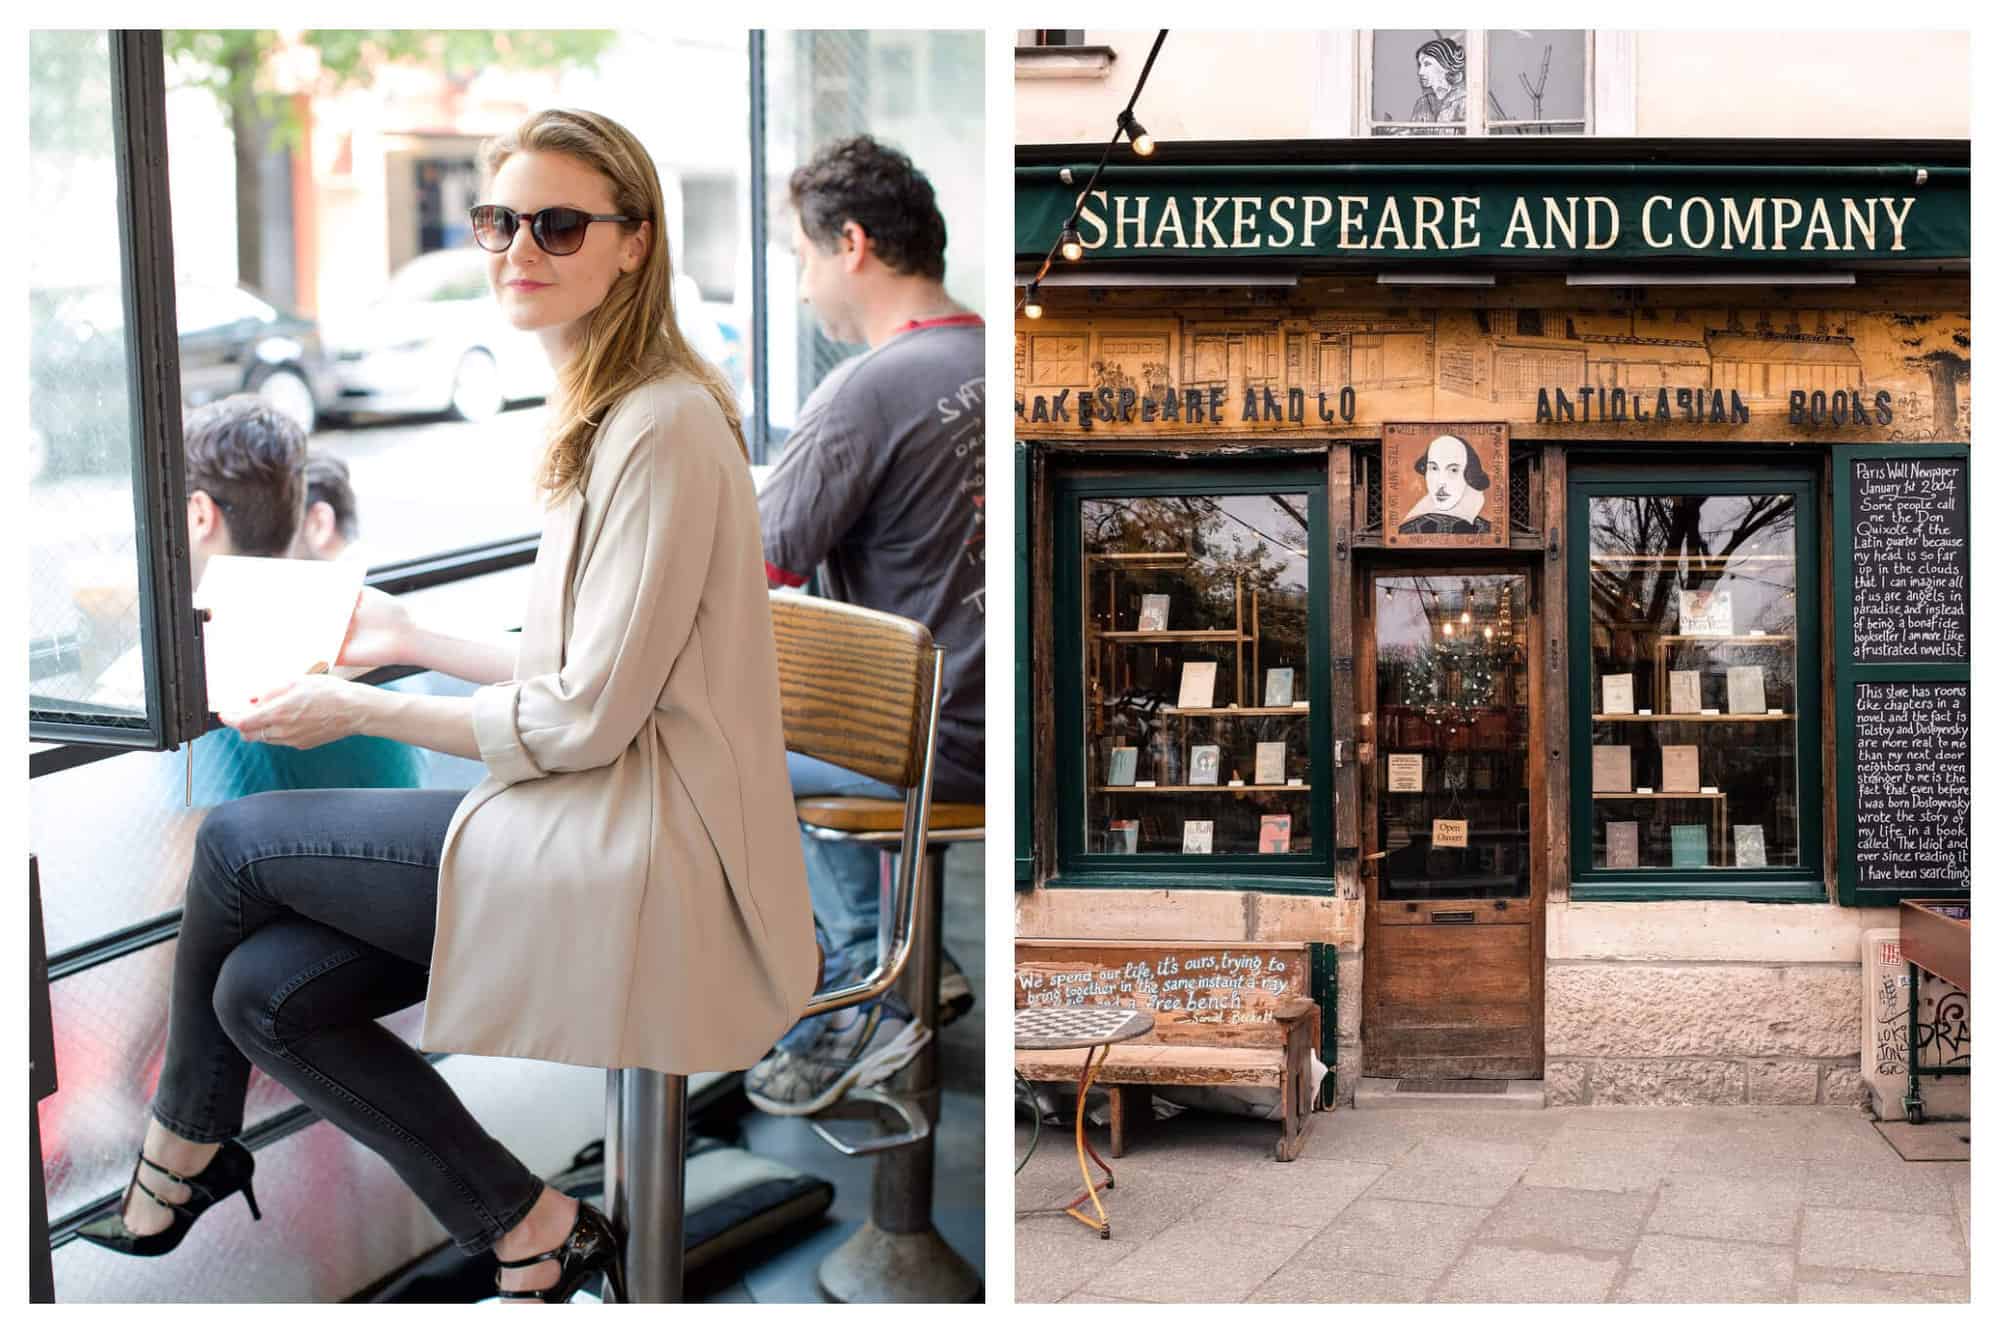 On the left is Tory sitting in a cafe near the window with a beige jacket and sunglasses holding a book. On the right is the front of the bookstore Shakespeare and Company, located in Paris